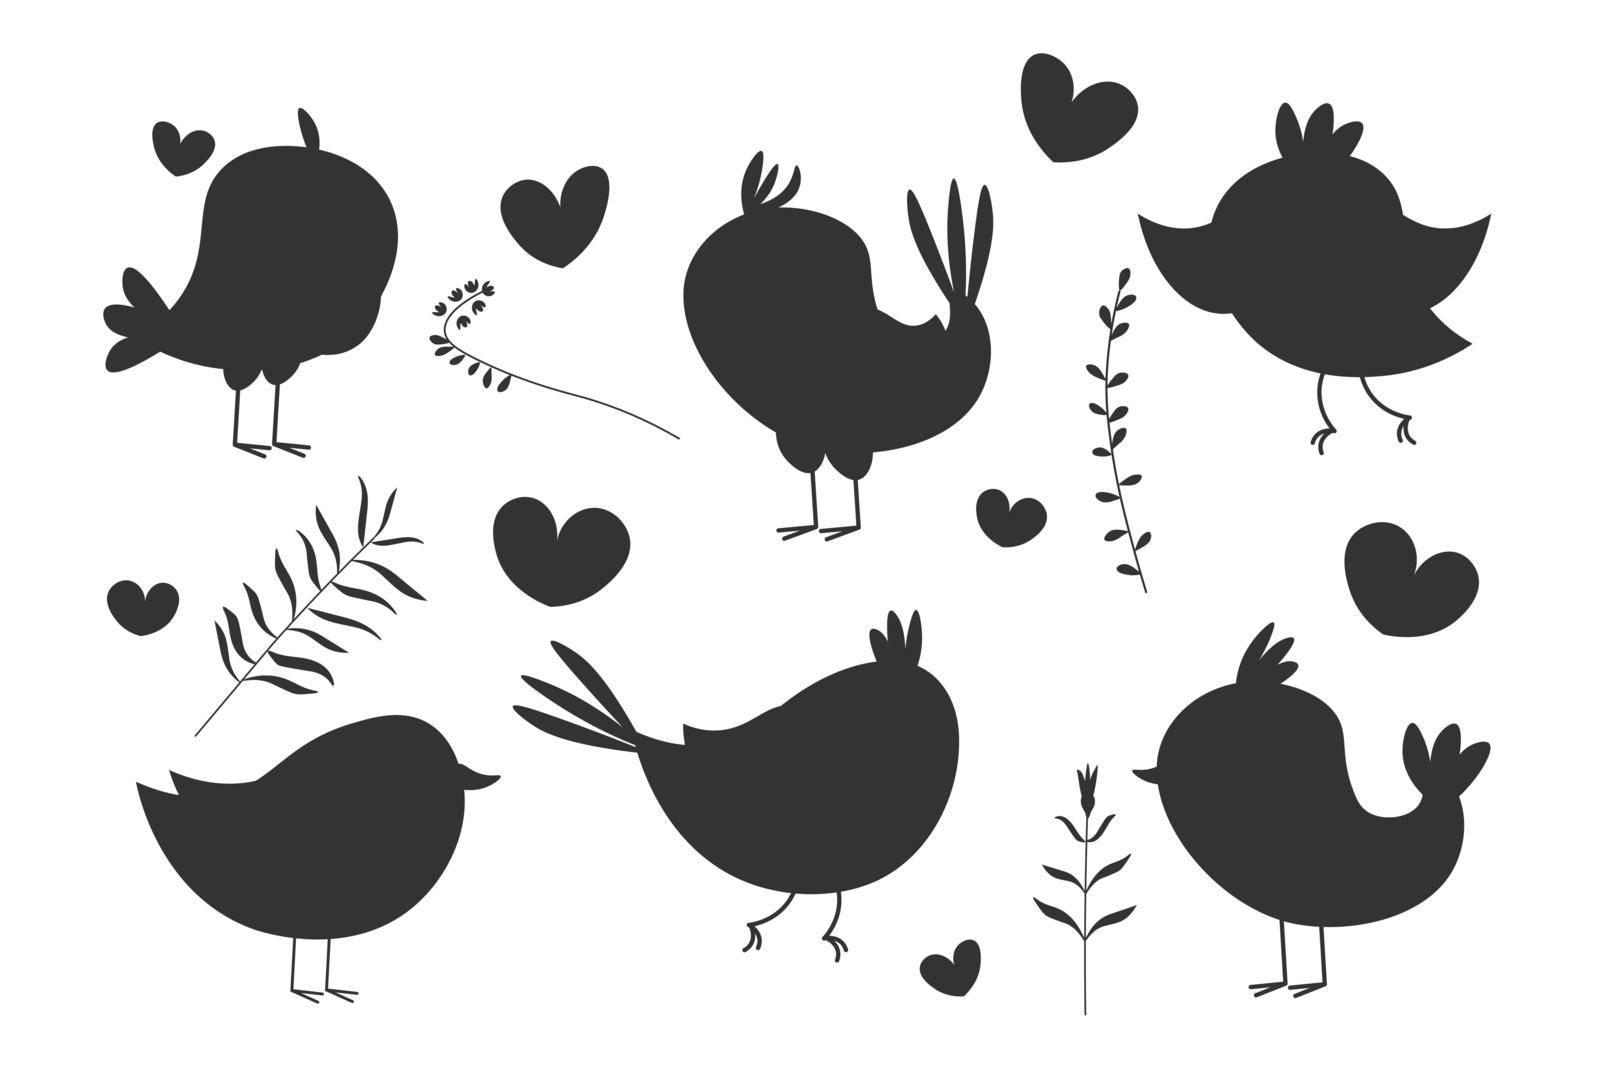 Cute Cartoon Style Bird and plants Silhouettes in Vector Format